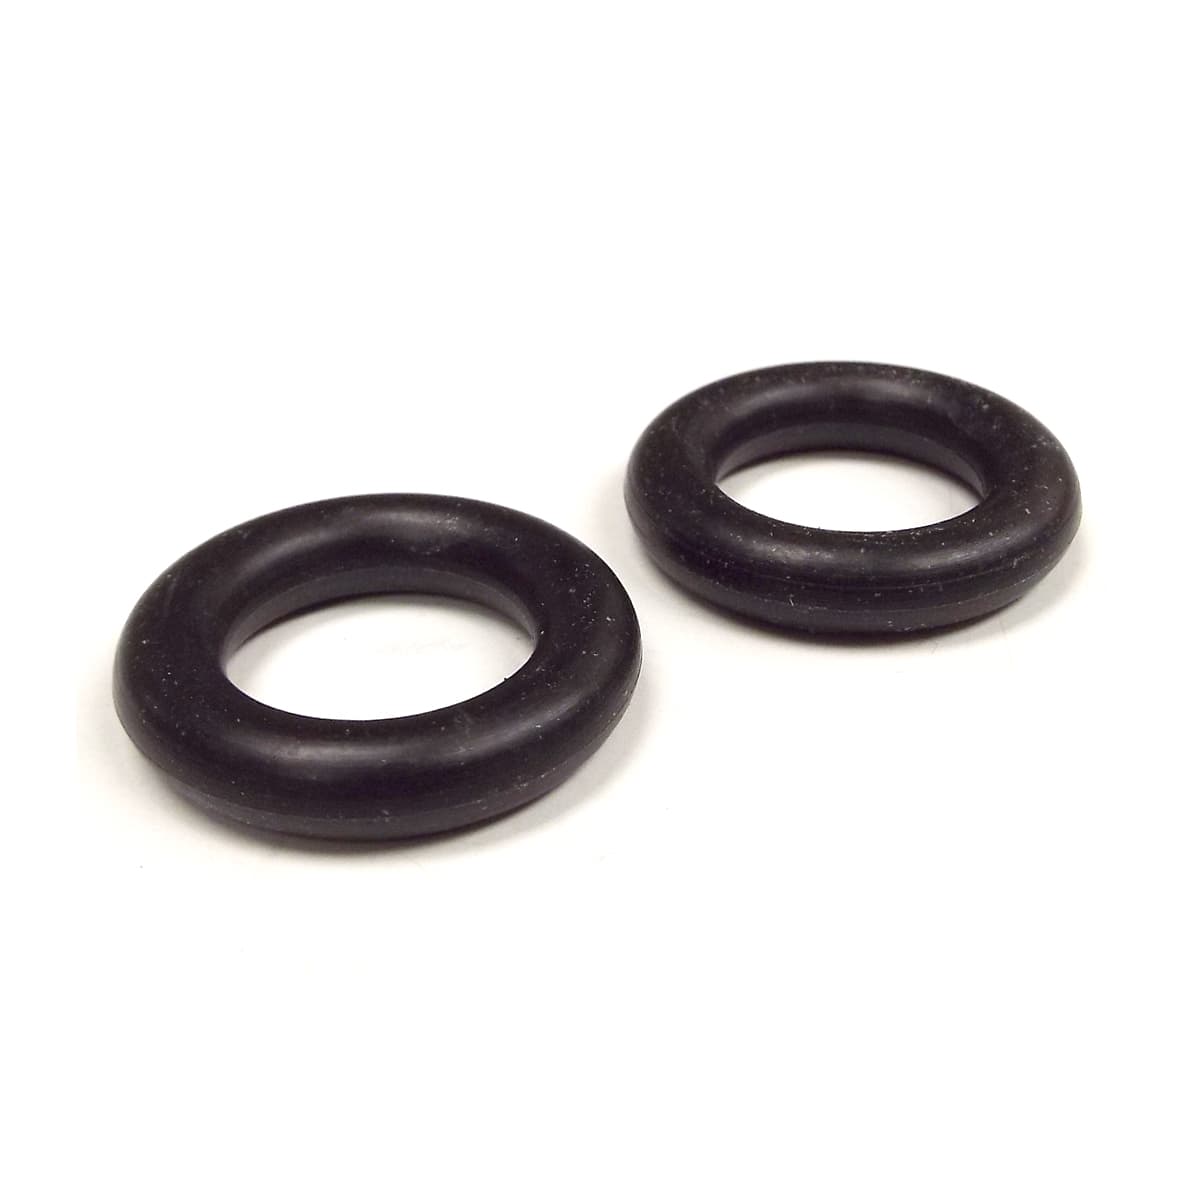 1934-1953 Rubber Rings for Spark Plug Wires Chevrolet and GMC Pickup Truck